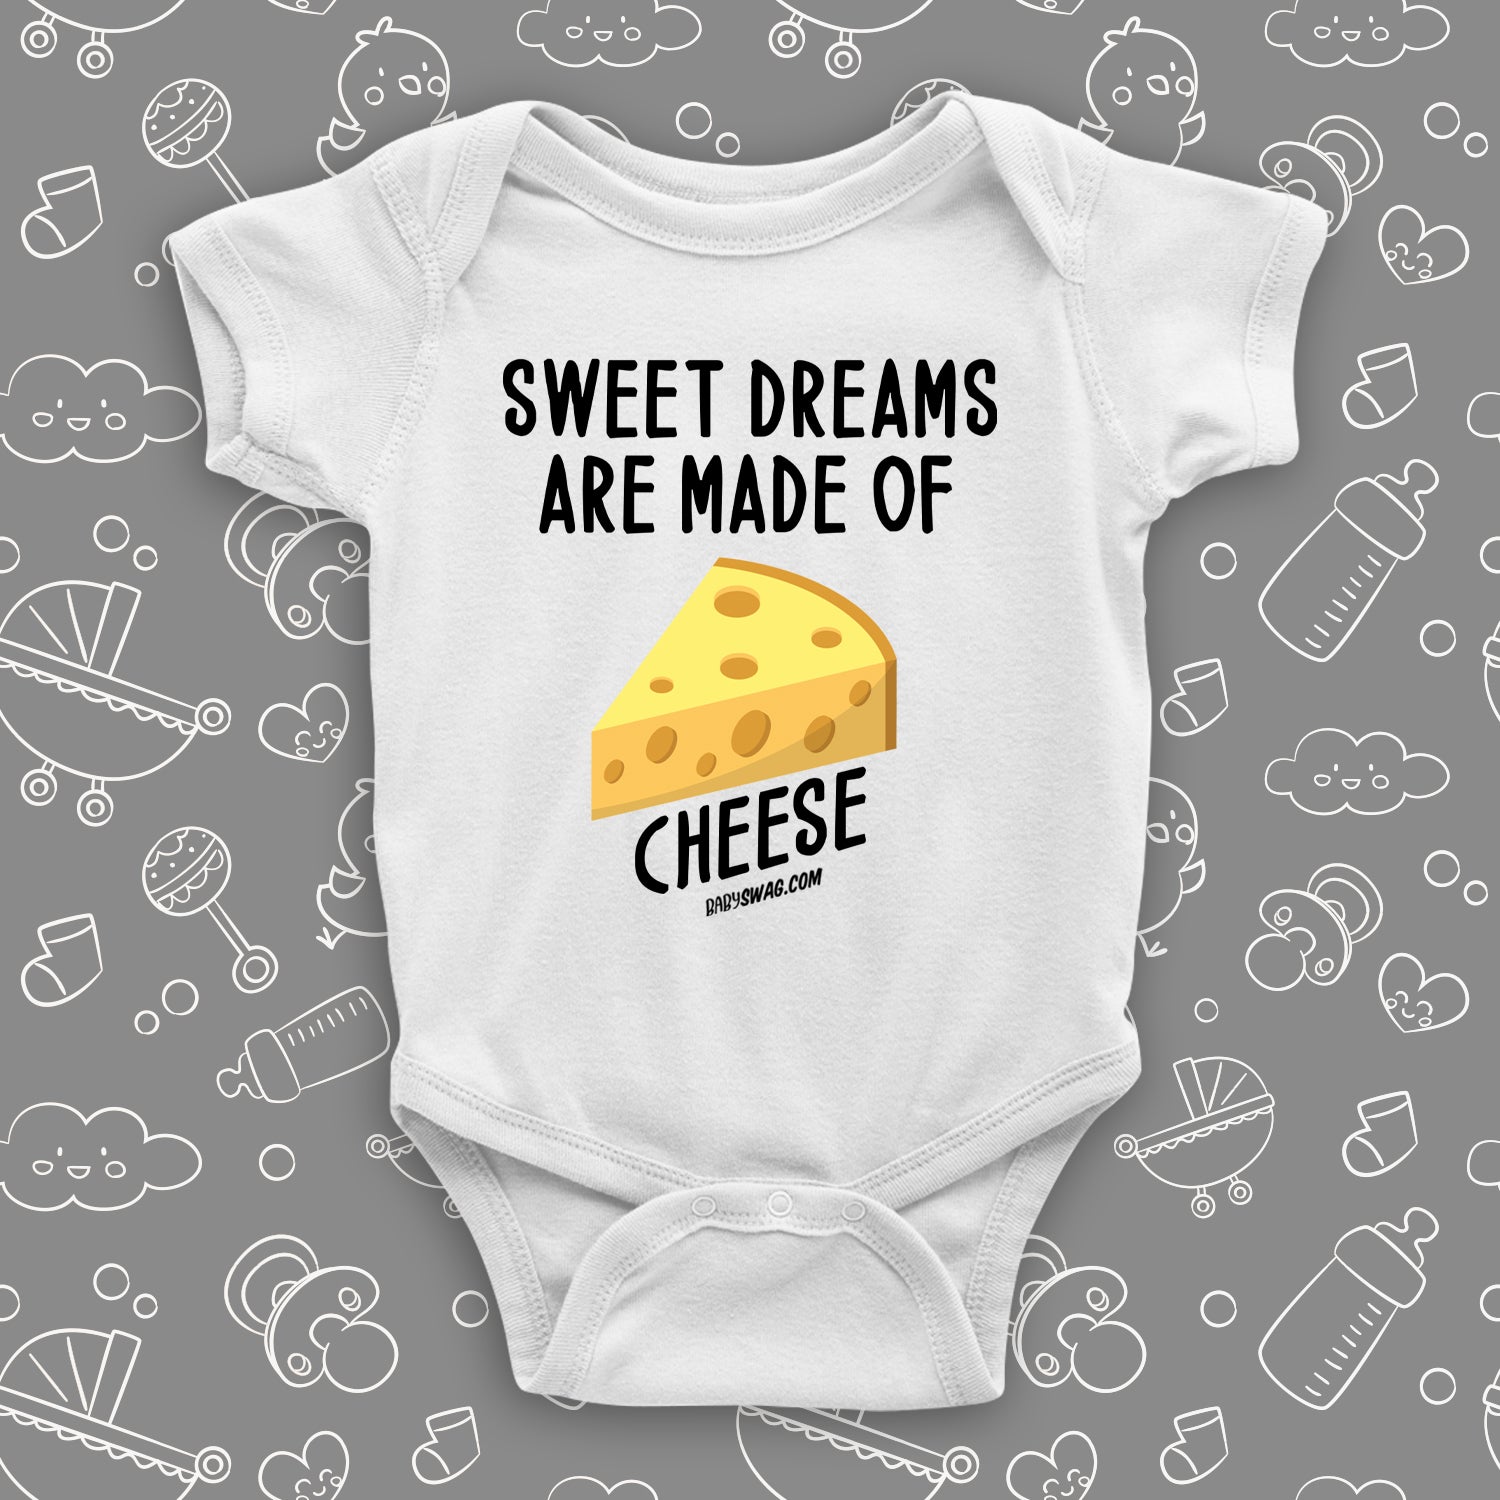 White baby onesie with print: "Sweet dreams are made of" and an image of cheese.